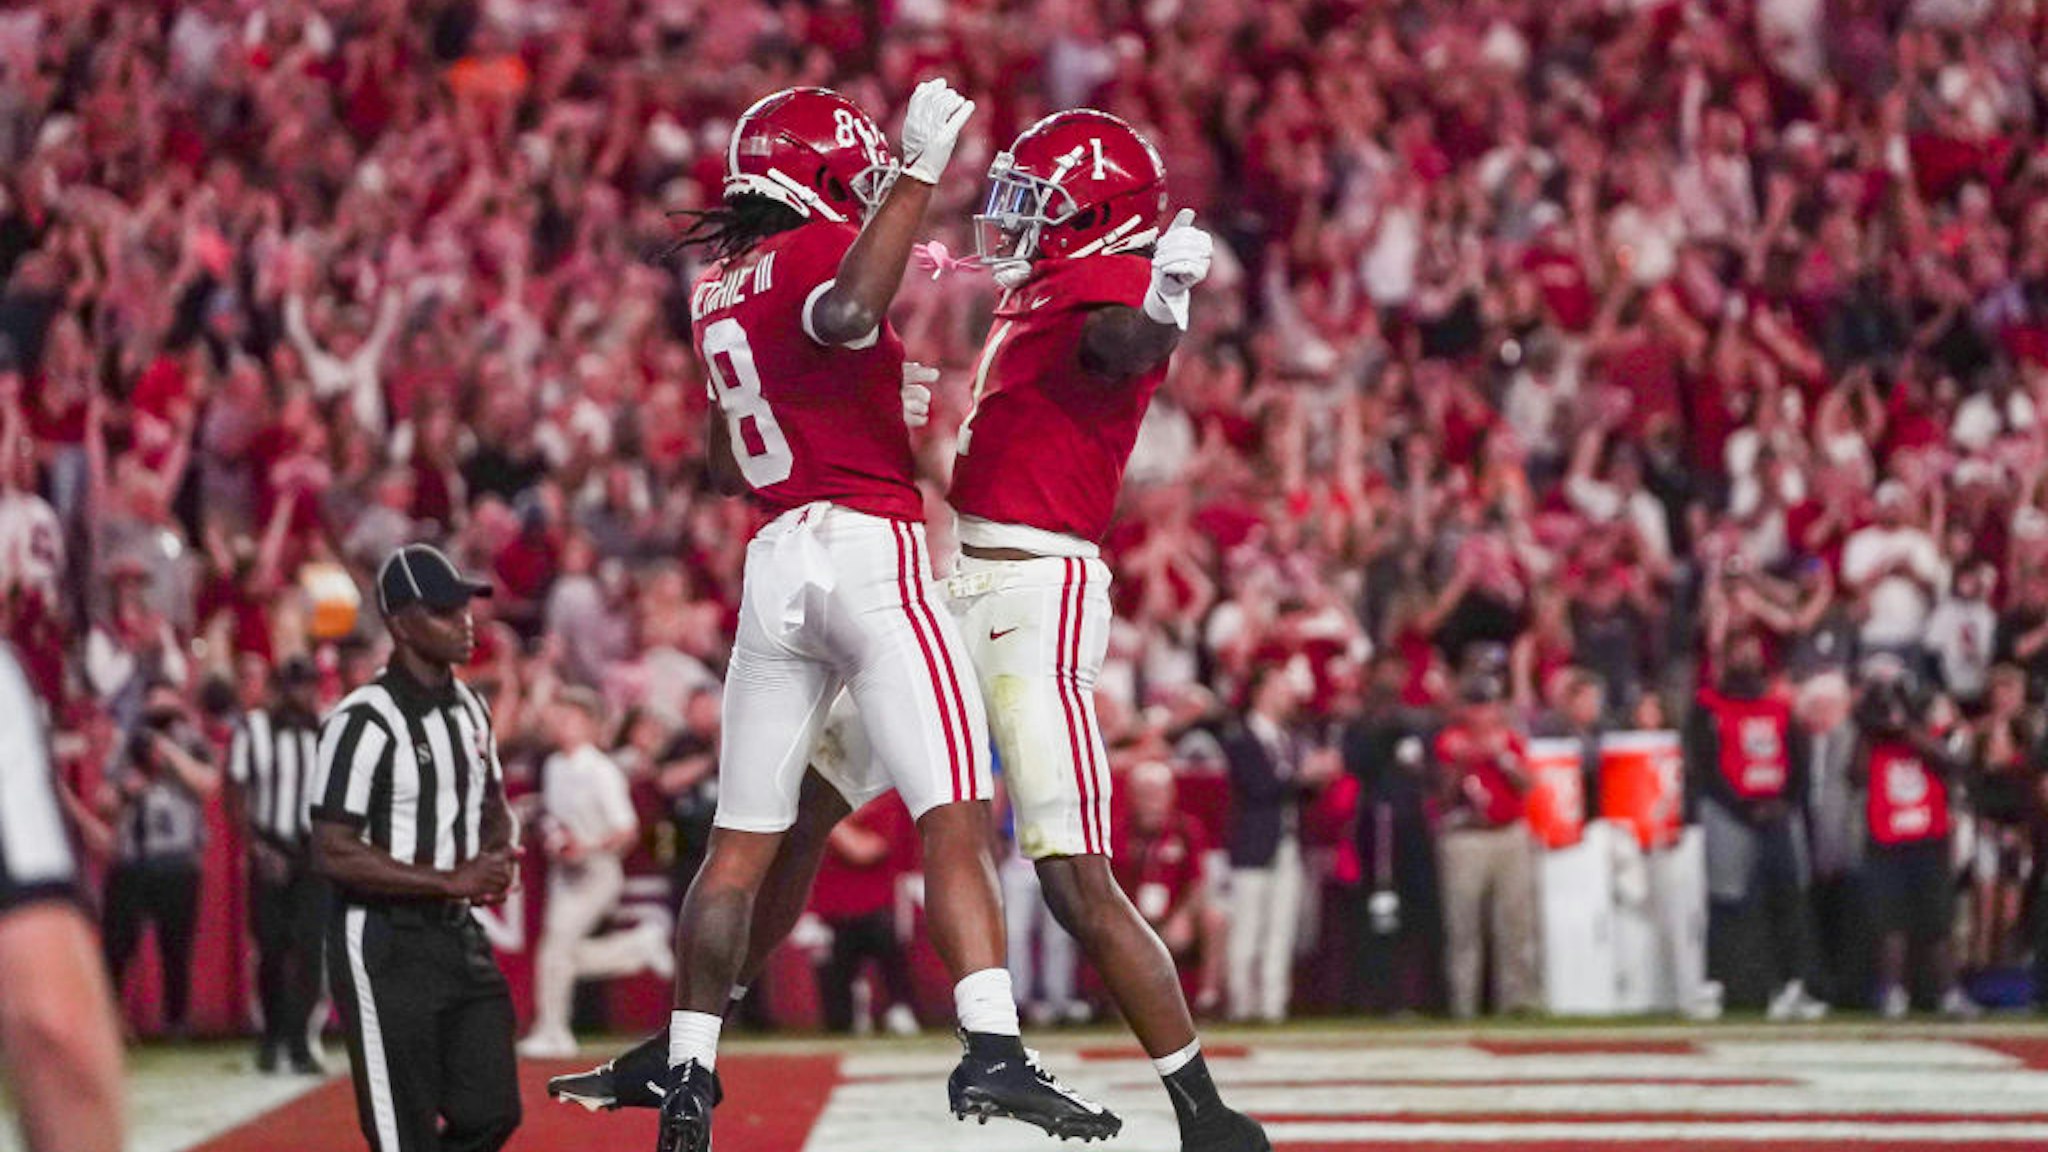 TUSCALOOSA, ALABAMA - OCTOBER 23: John Metchie III #8 of the Alabama Crimson Tide and Jameson Williams #1 of the Alabama Crimson Tide celebrate after Metchie scores in the second half at Bryant Denny Stadium on October 23, 2021 in Tuscaloosa, Alabama (Photo by Marvin Gentry/Getty Images )